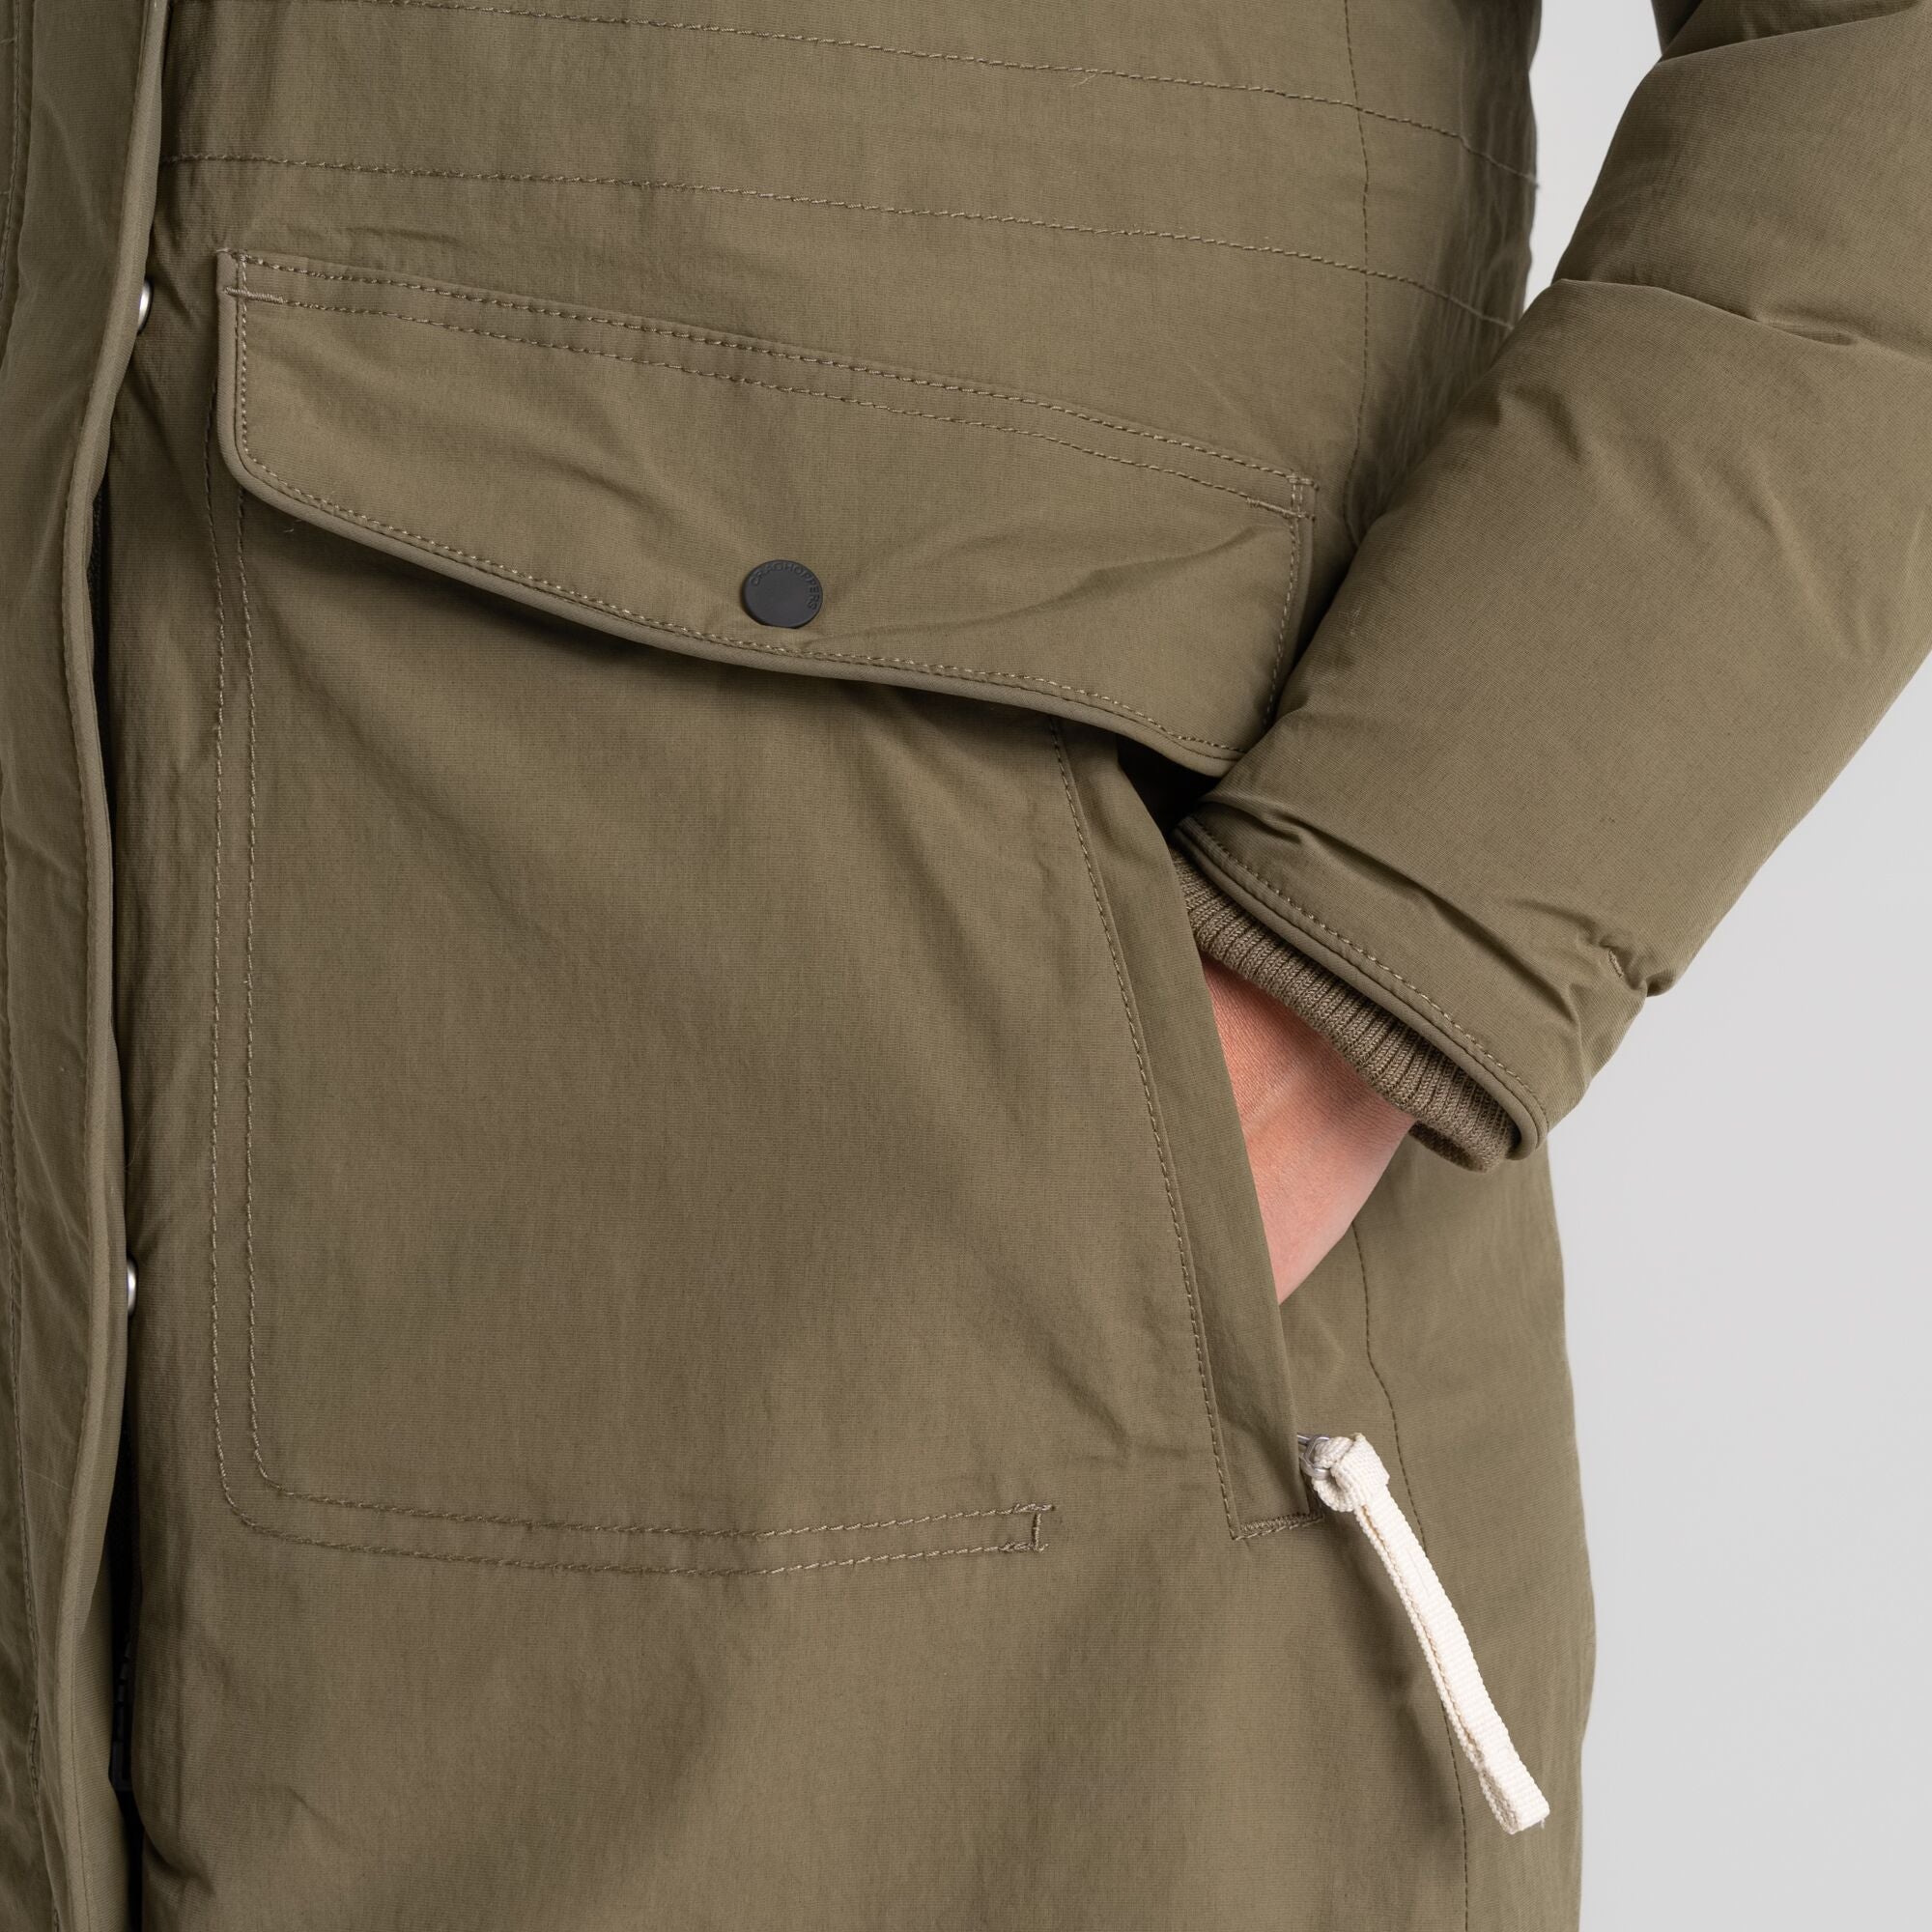 Women's Lundale Insulated Jacket | Wild Olive